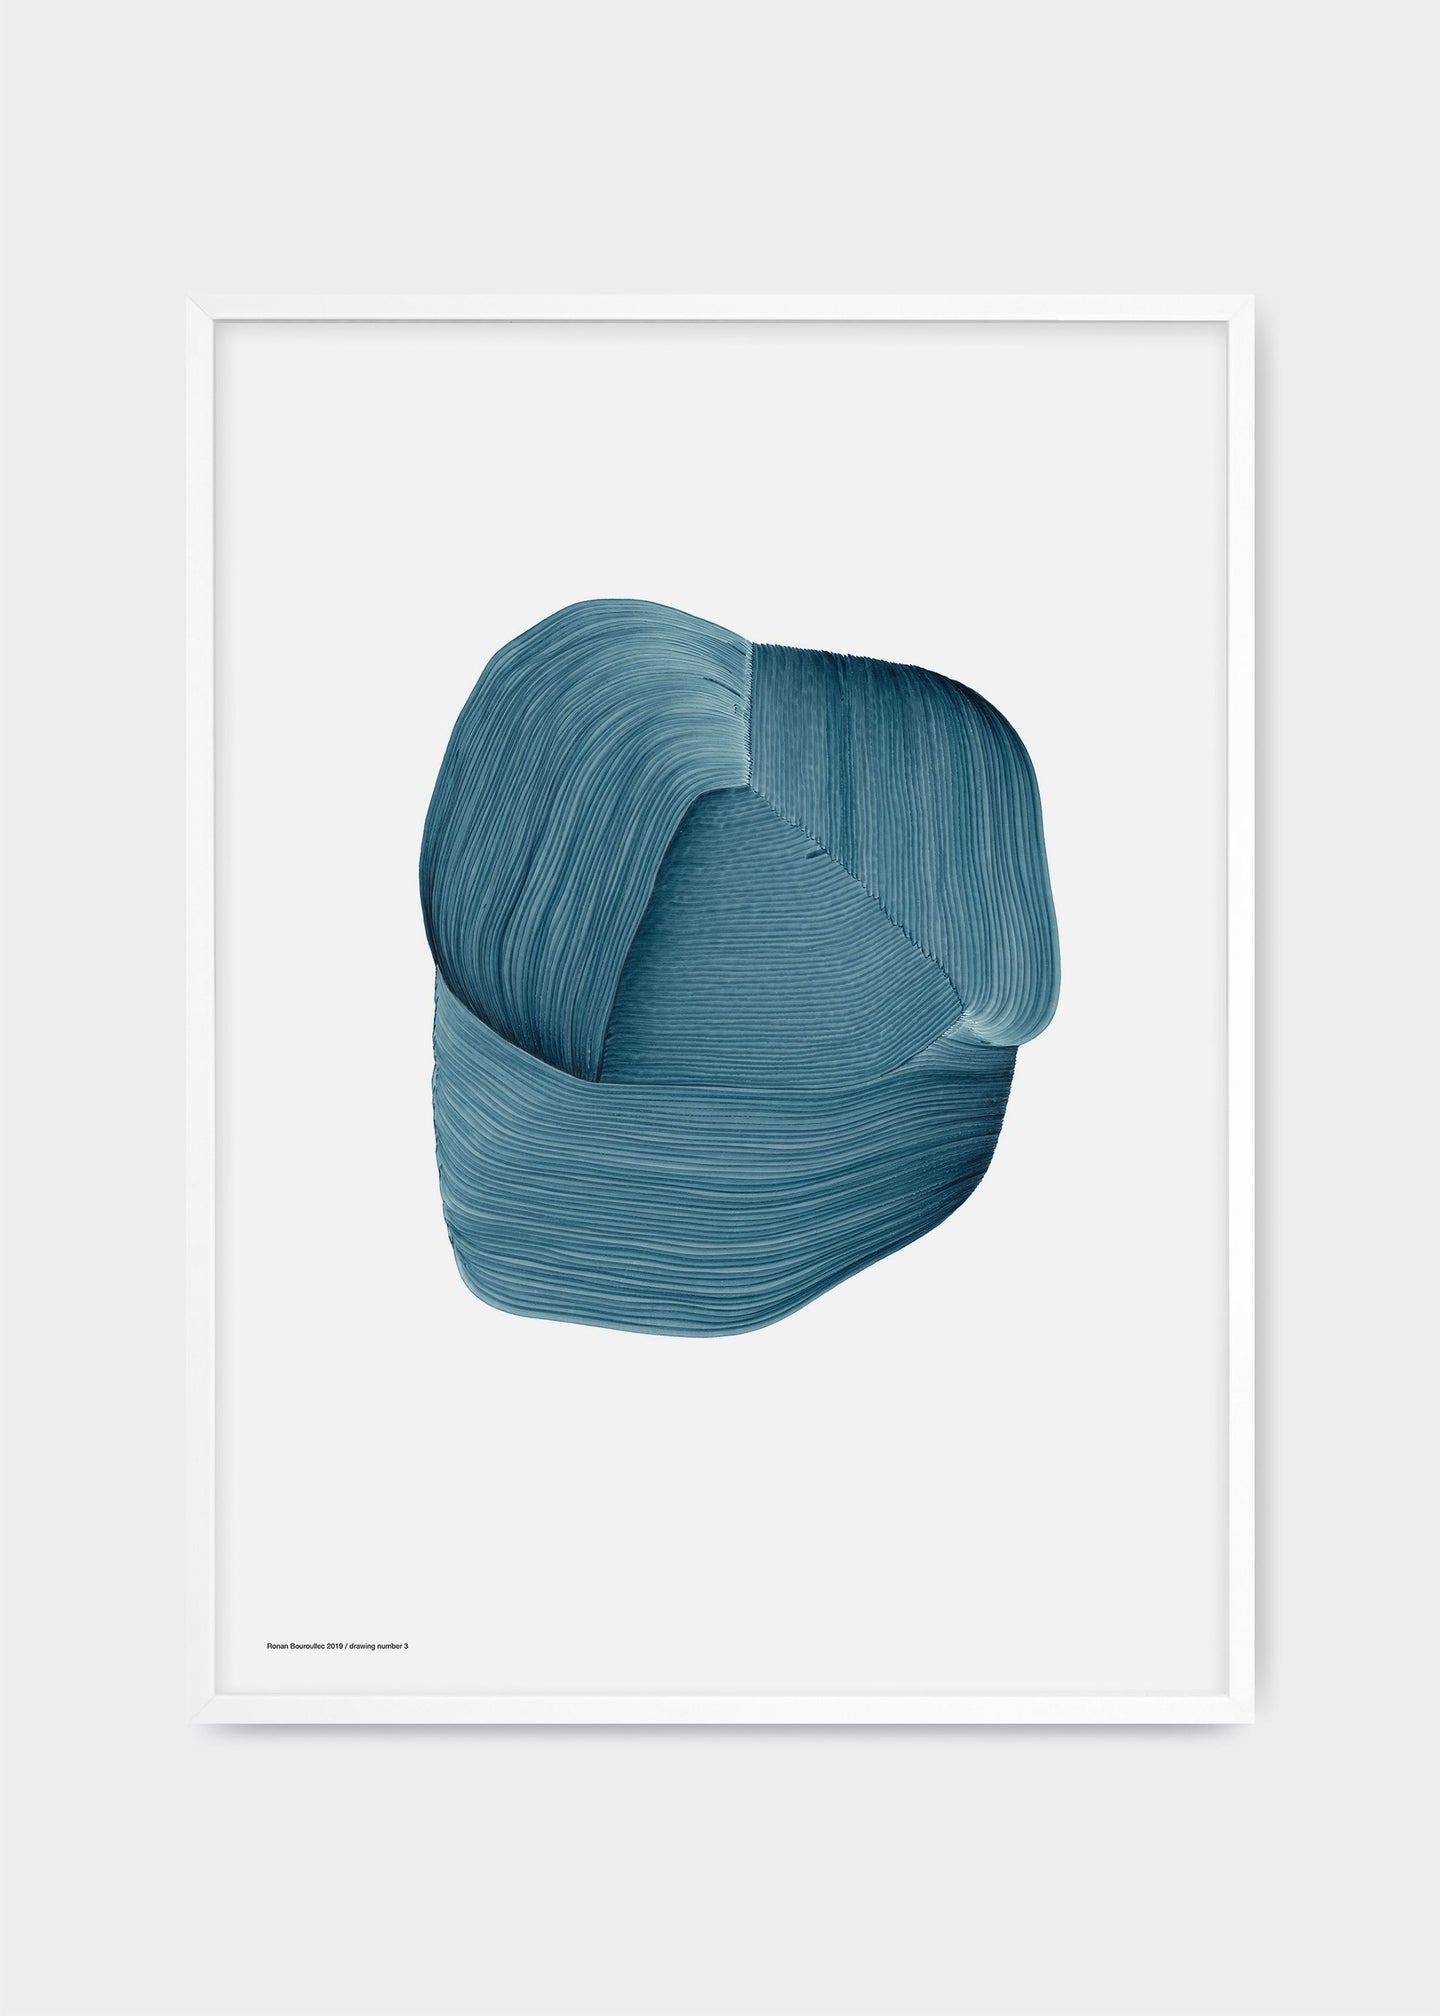 Ronan Bouroullec - Drawing 3 - Framed